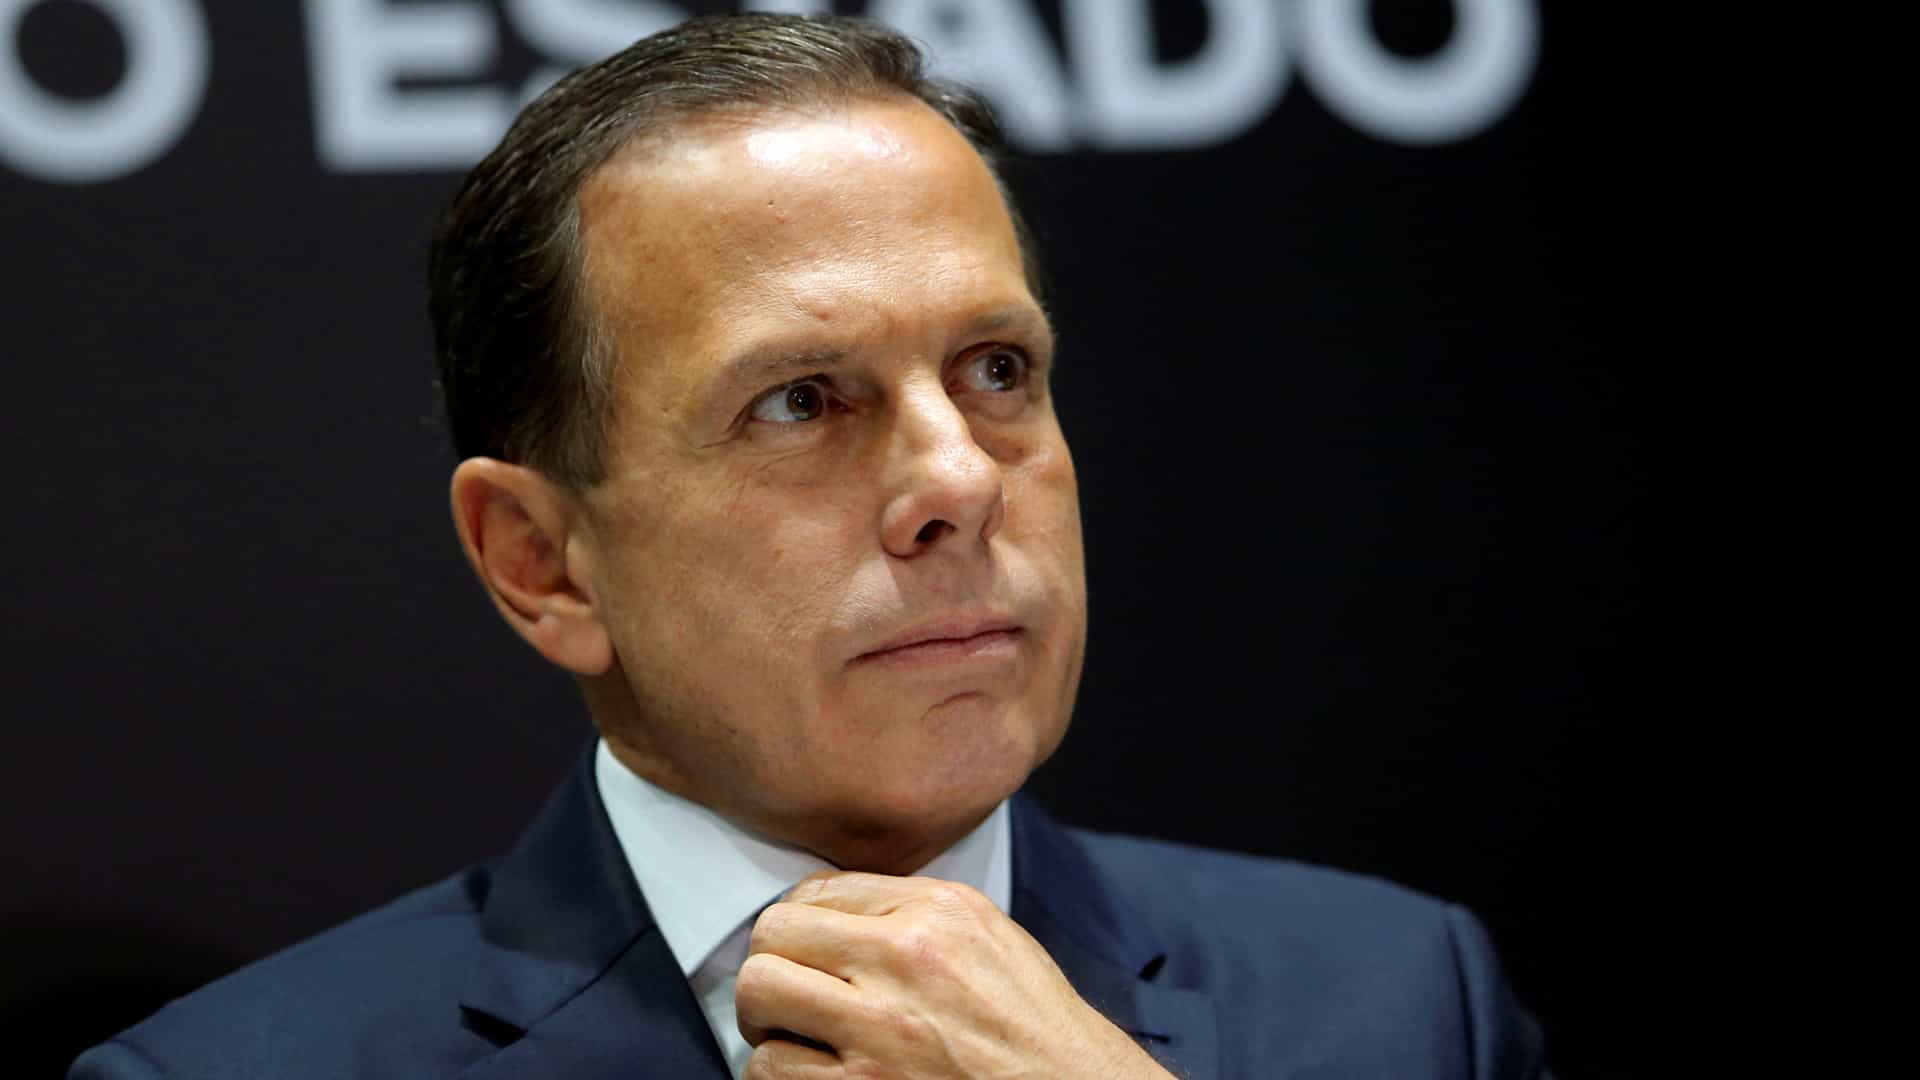 In a press conference, Doria spoke mainly to all those who advocate a return to work.